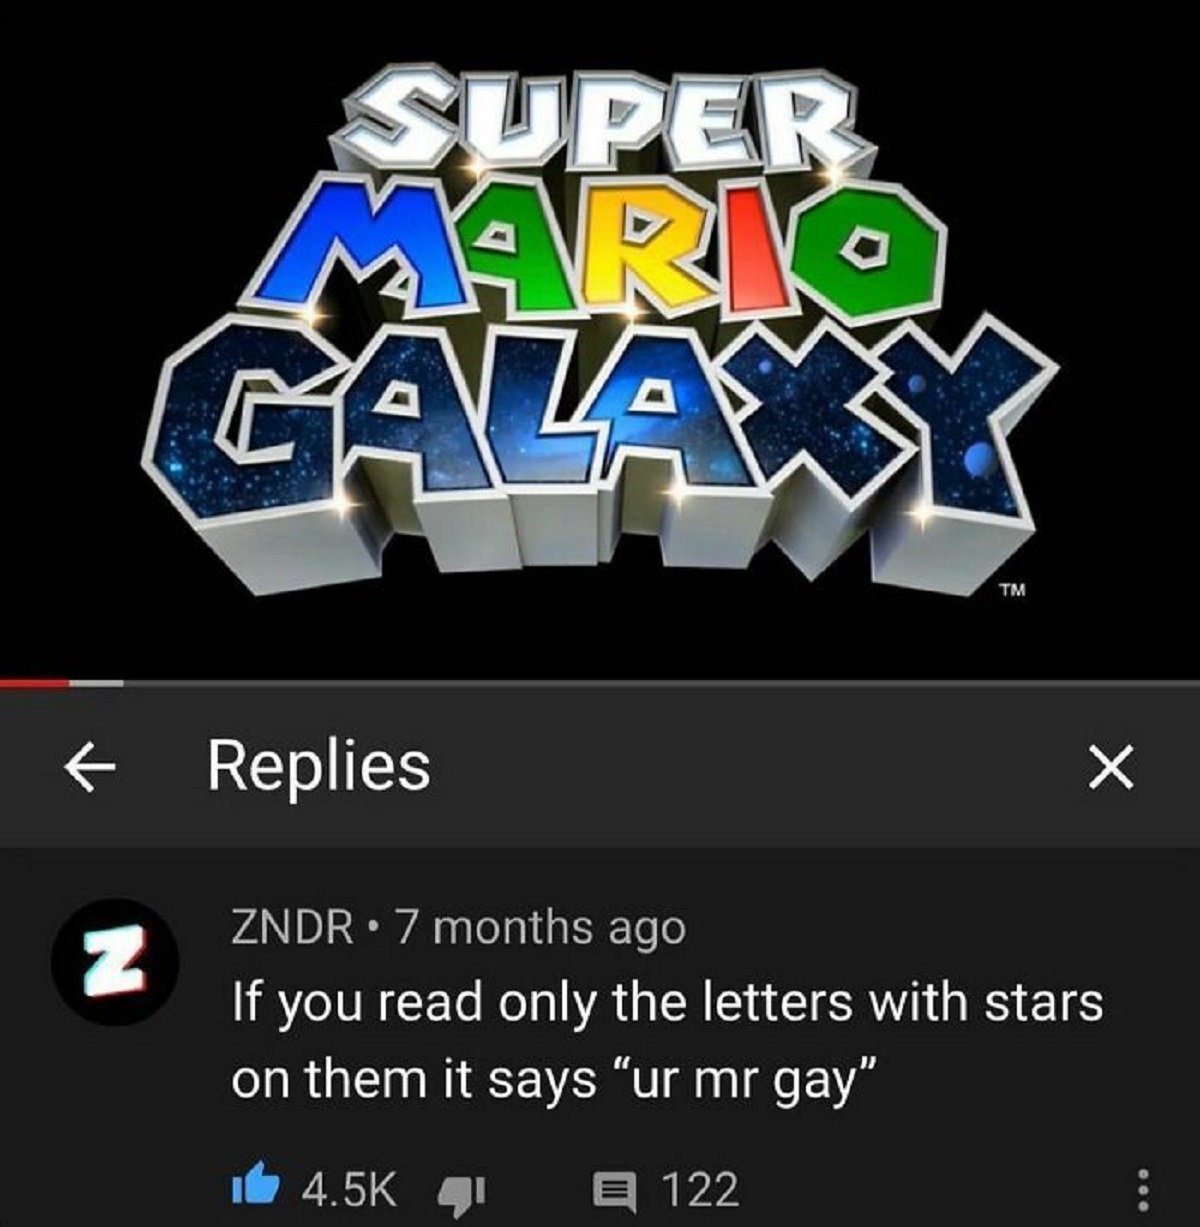 graphic design - Super Mario Galaxy Tm Replies N Zndr 7 months ago If you read only the letters with stars on them it says "ur mr gay" 1 122